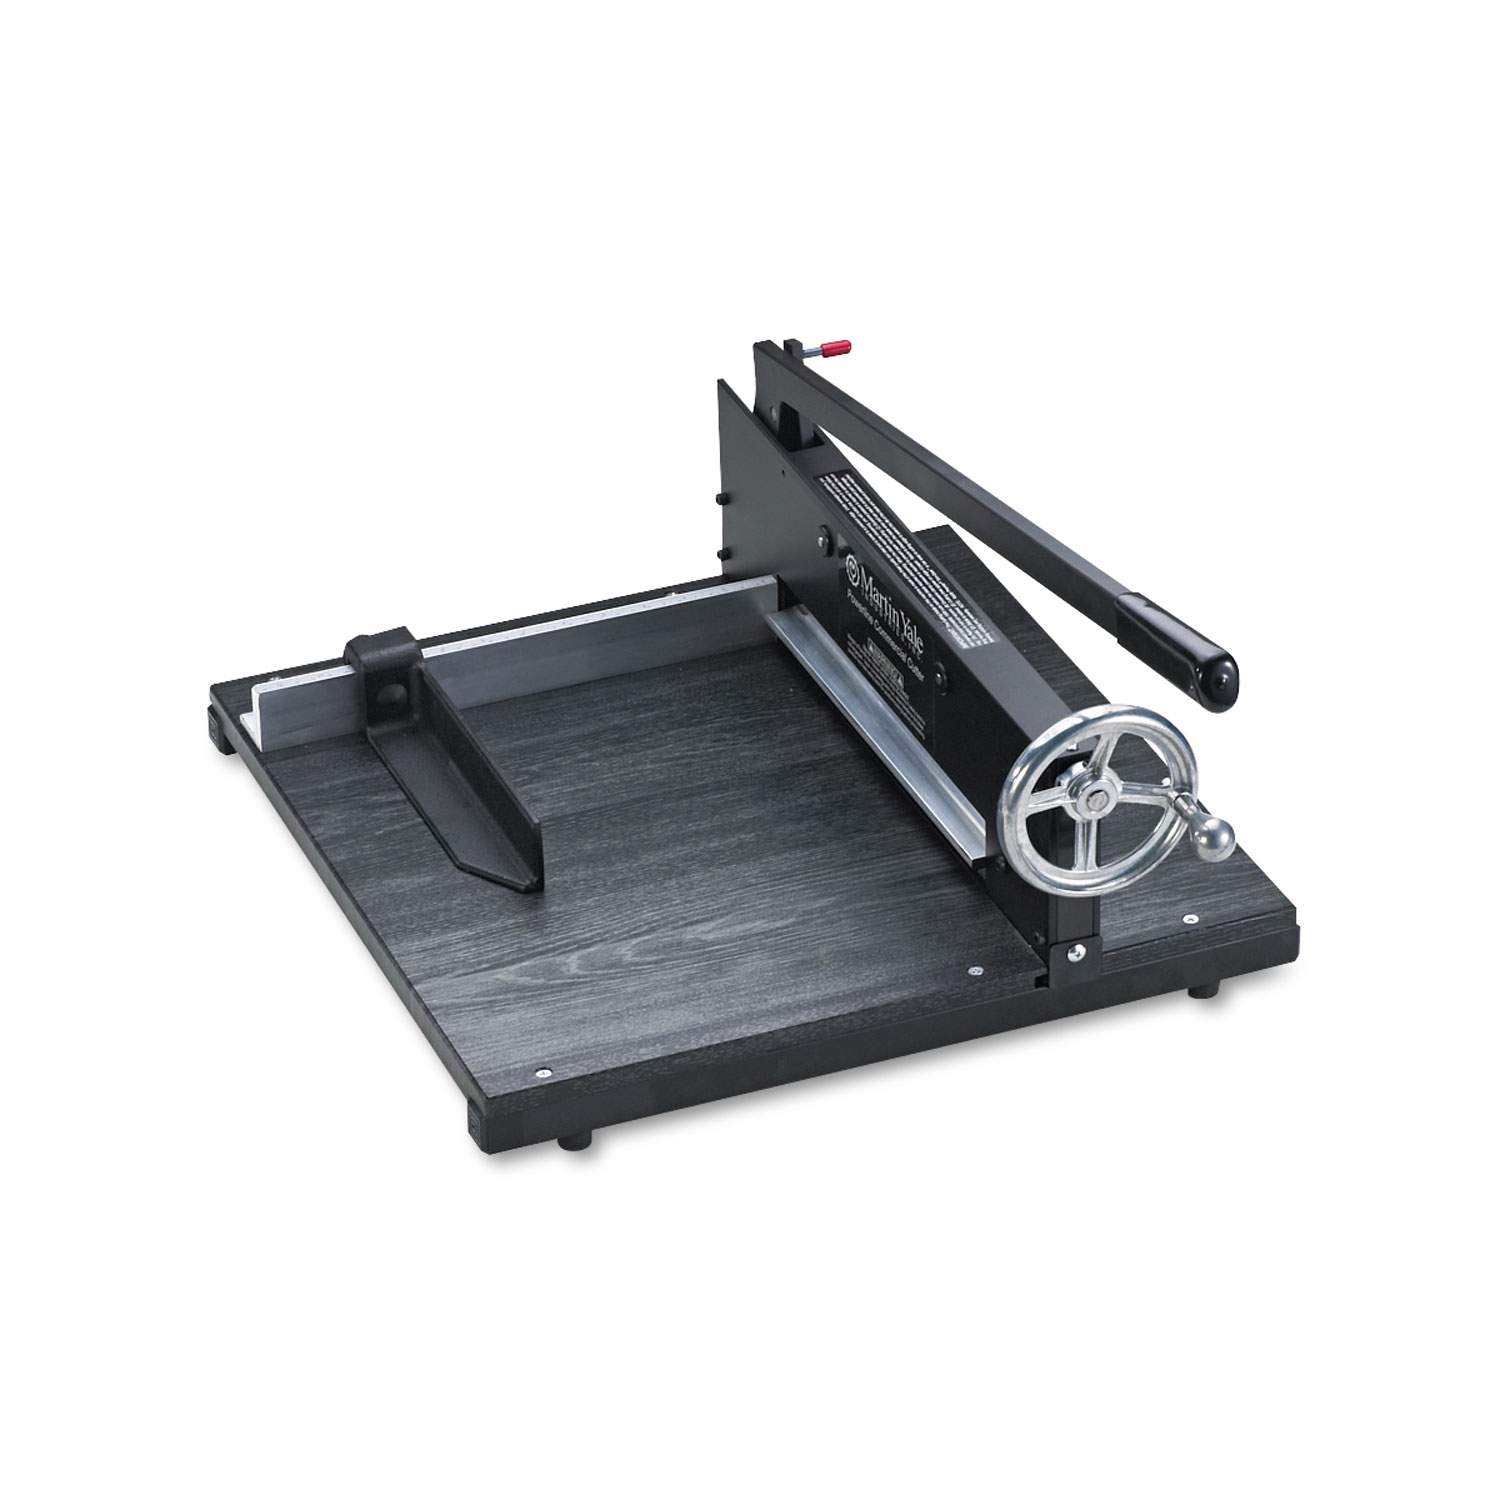 Commercial Stack Paper Cutter, 350 Sheet Capacity, Wood Base, 16 x 20